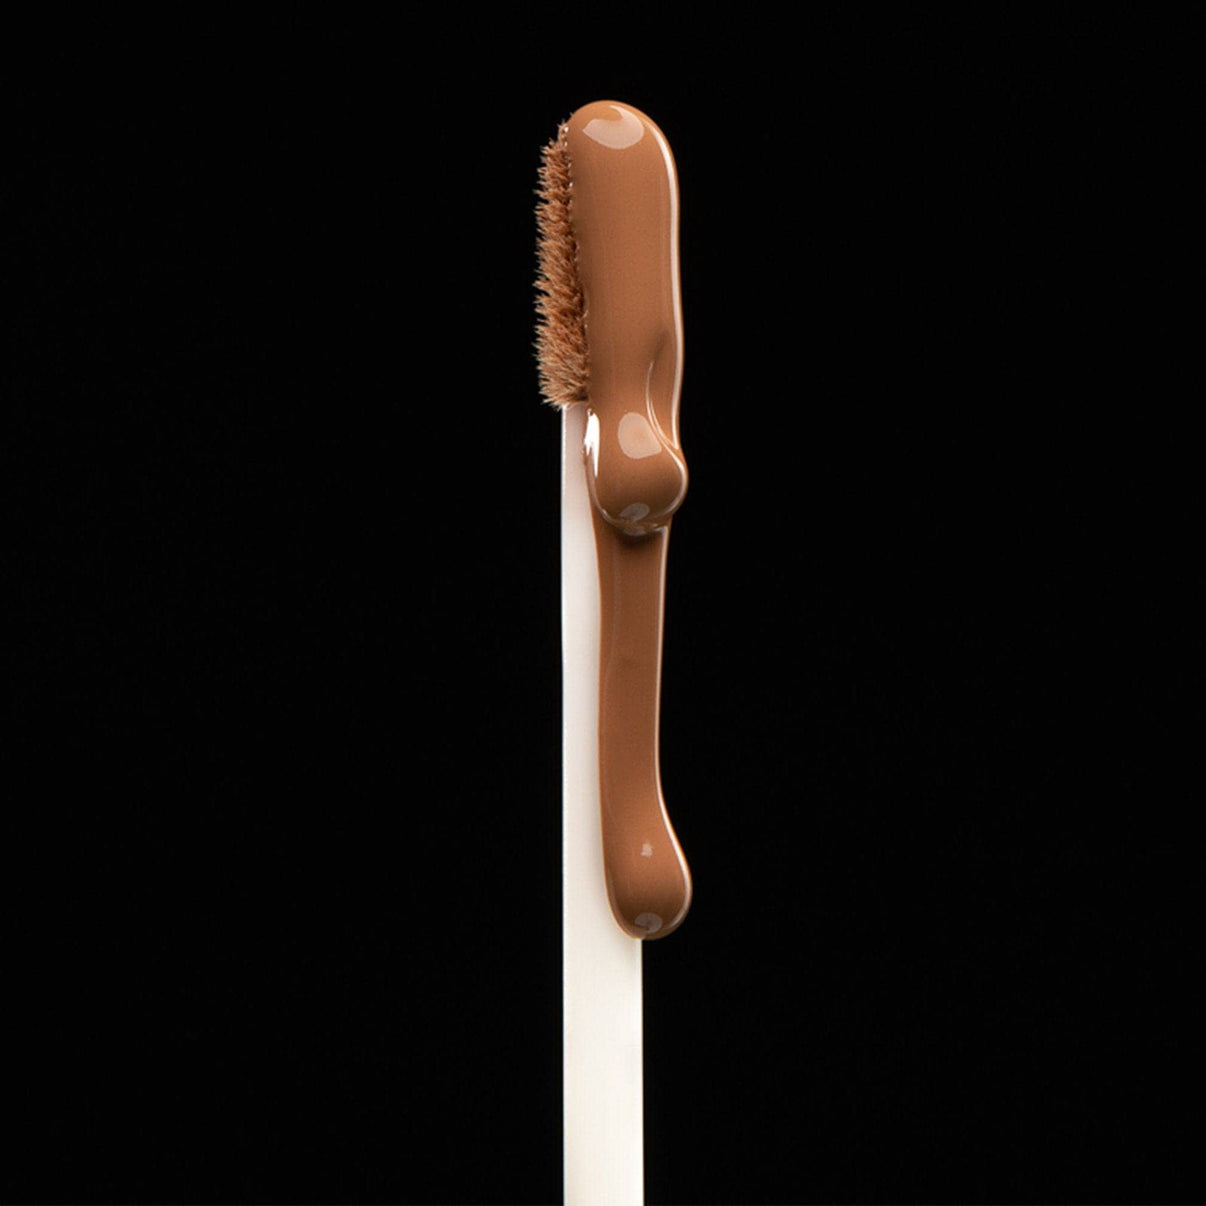 Nudefix cream concealer in shade nude 5.5 brush with product